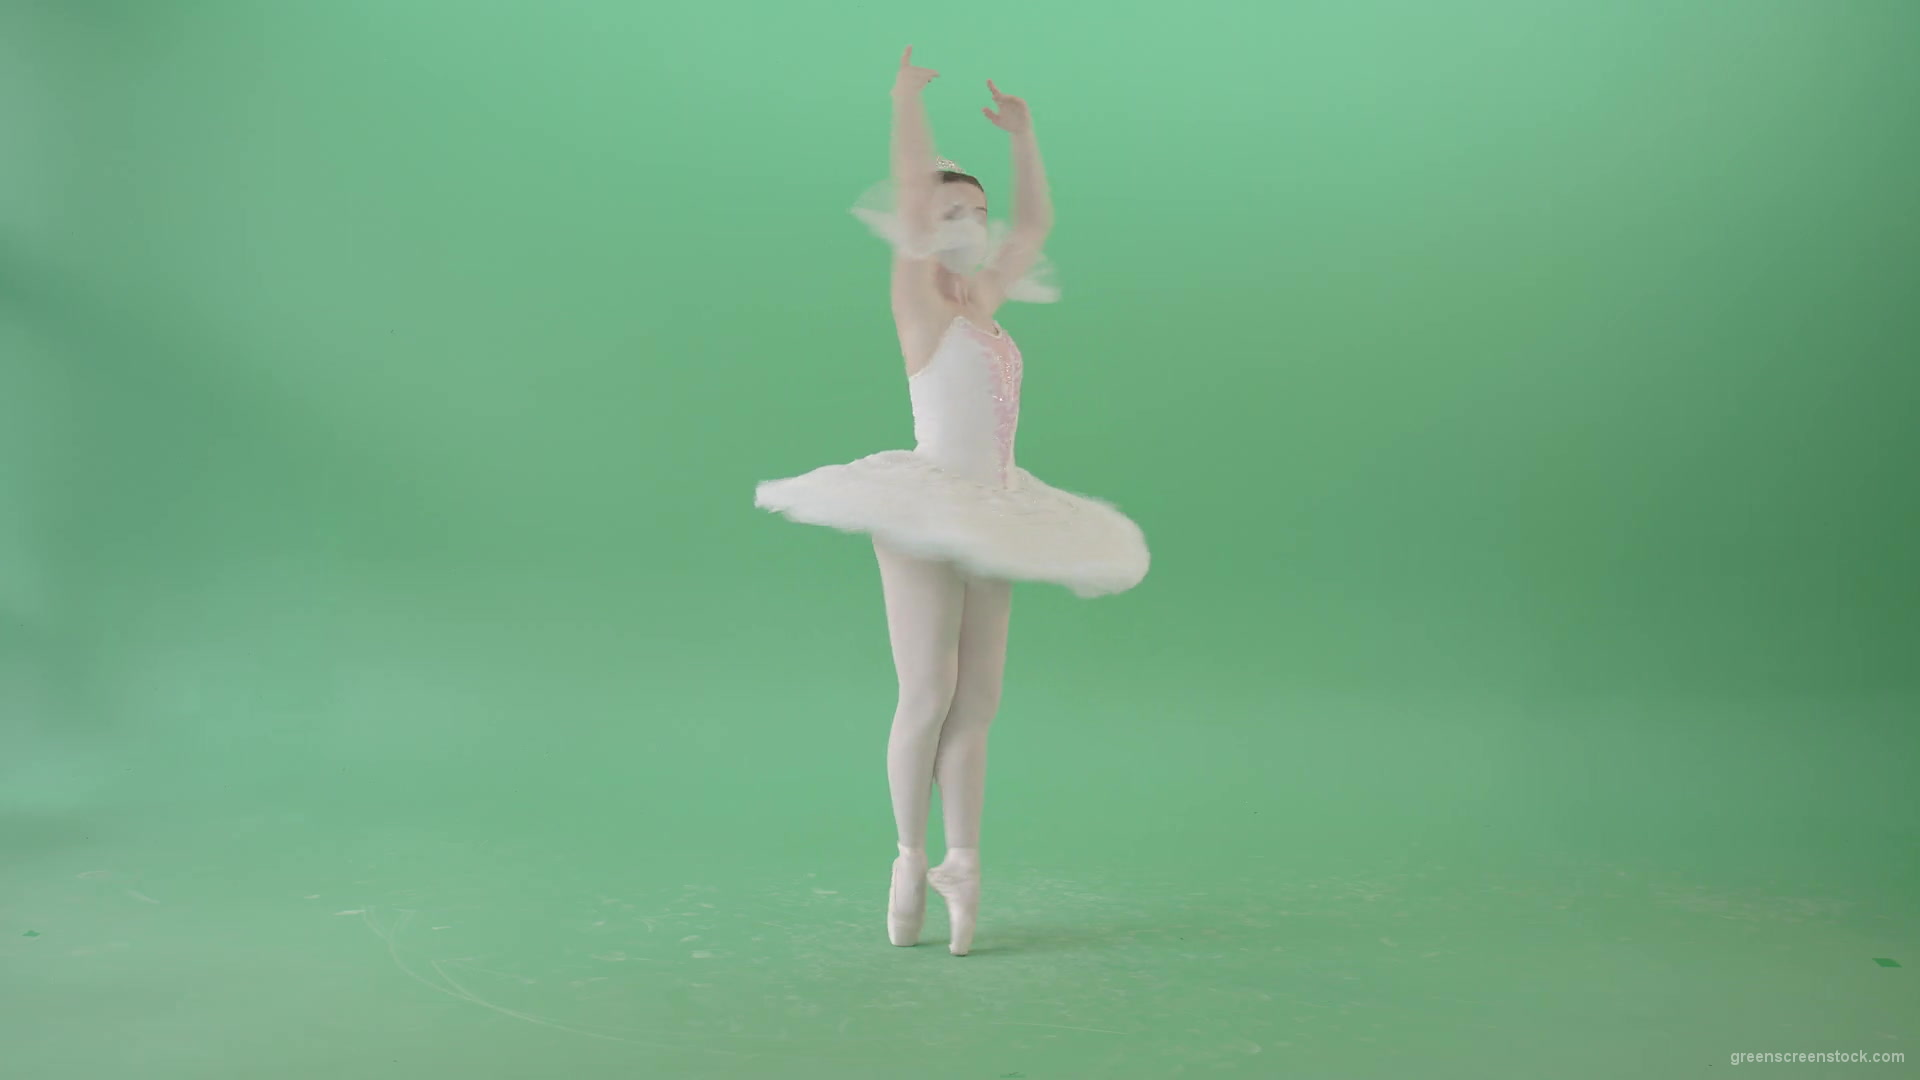 Dancing-ballerina-Girl-in-Ballet-Dress-and-Covid19-mask-dancing-isolated-on-green-screen-4K-Video-Footage--1920_005 Green Screen Stock